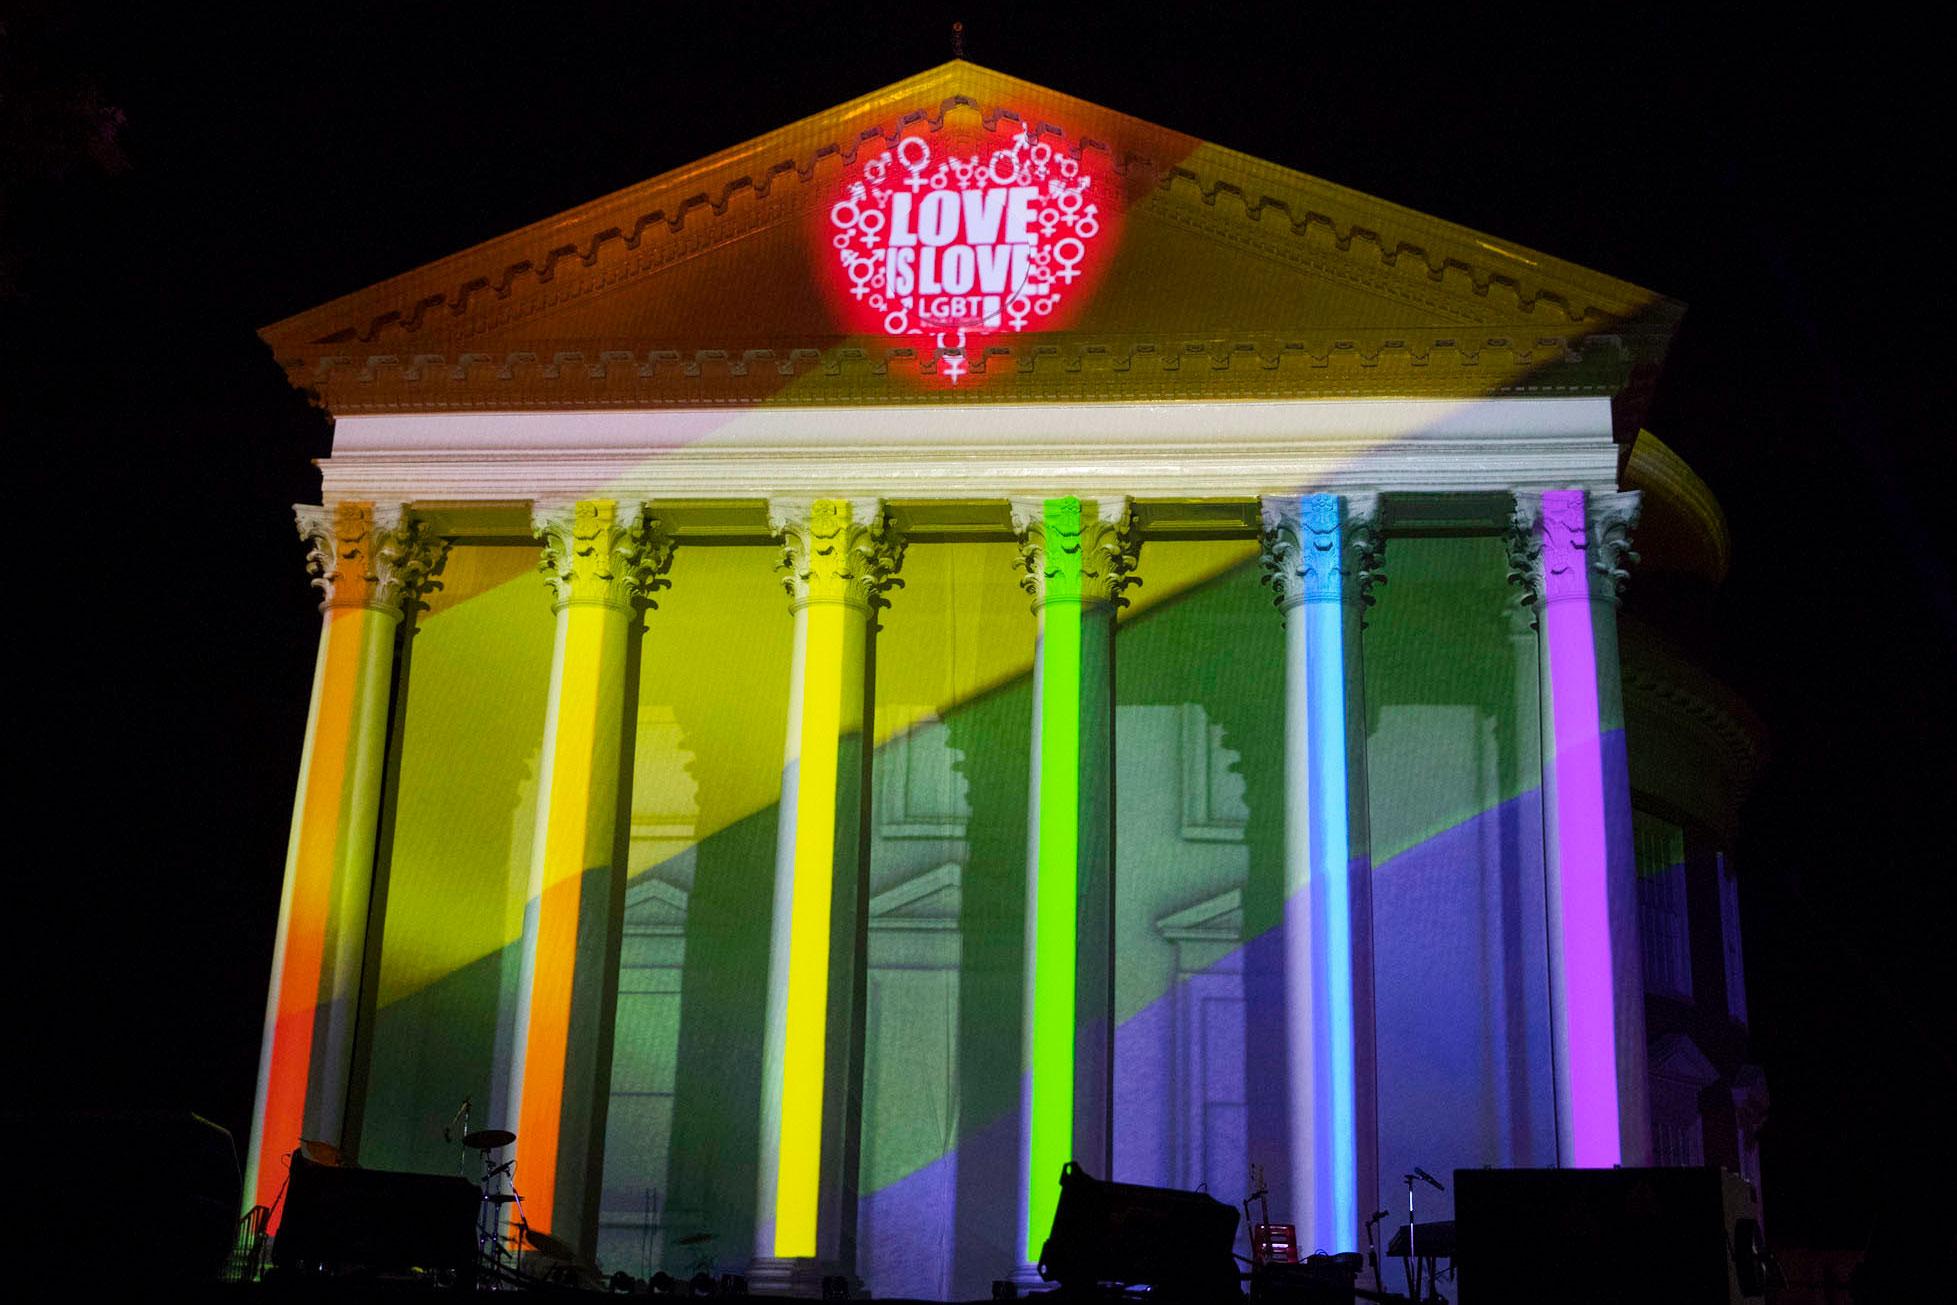 UVA Rotunda columns in colors of the rainbow with "Love is Love" projected.